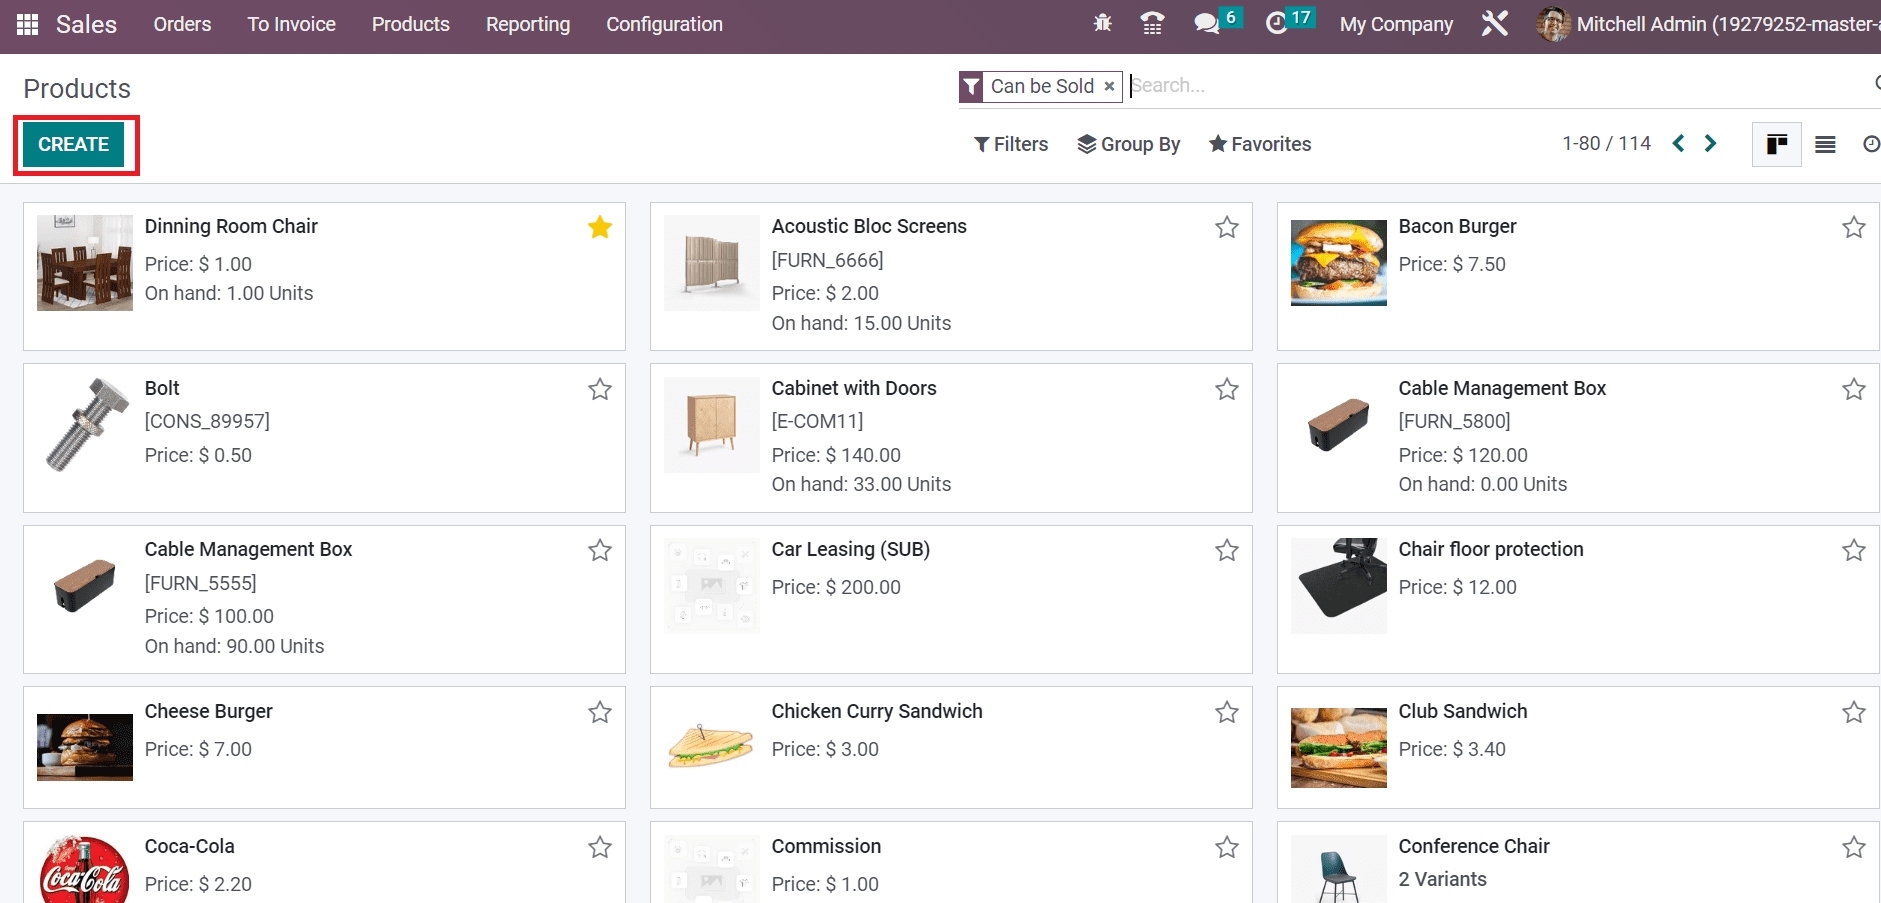 How to Generate an Automatic Invoice in the Odoo 16 Sales App-cybrosys